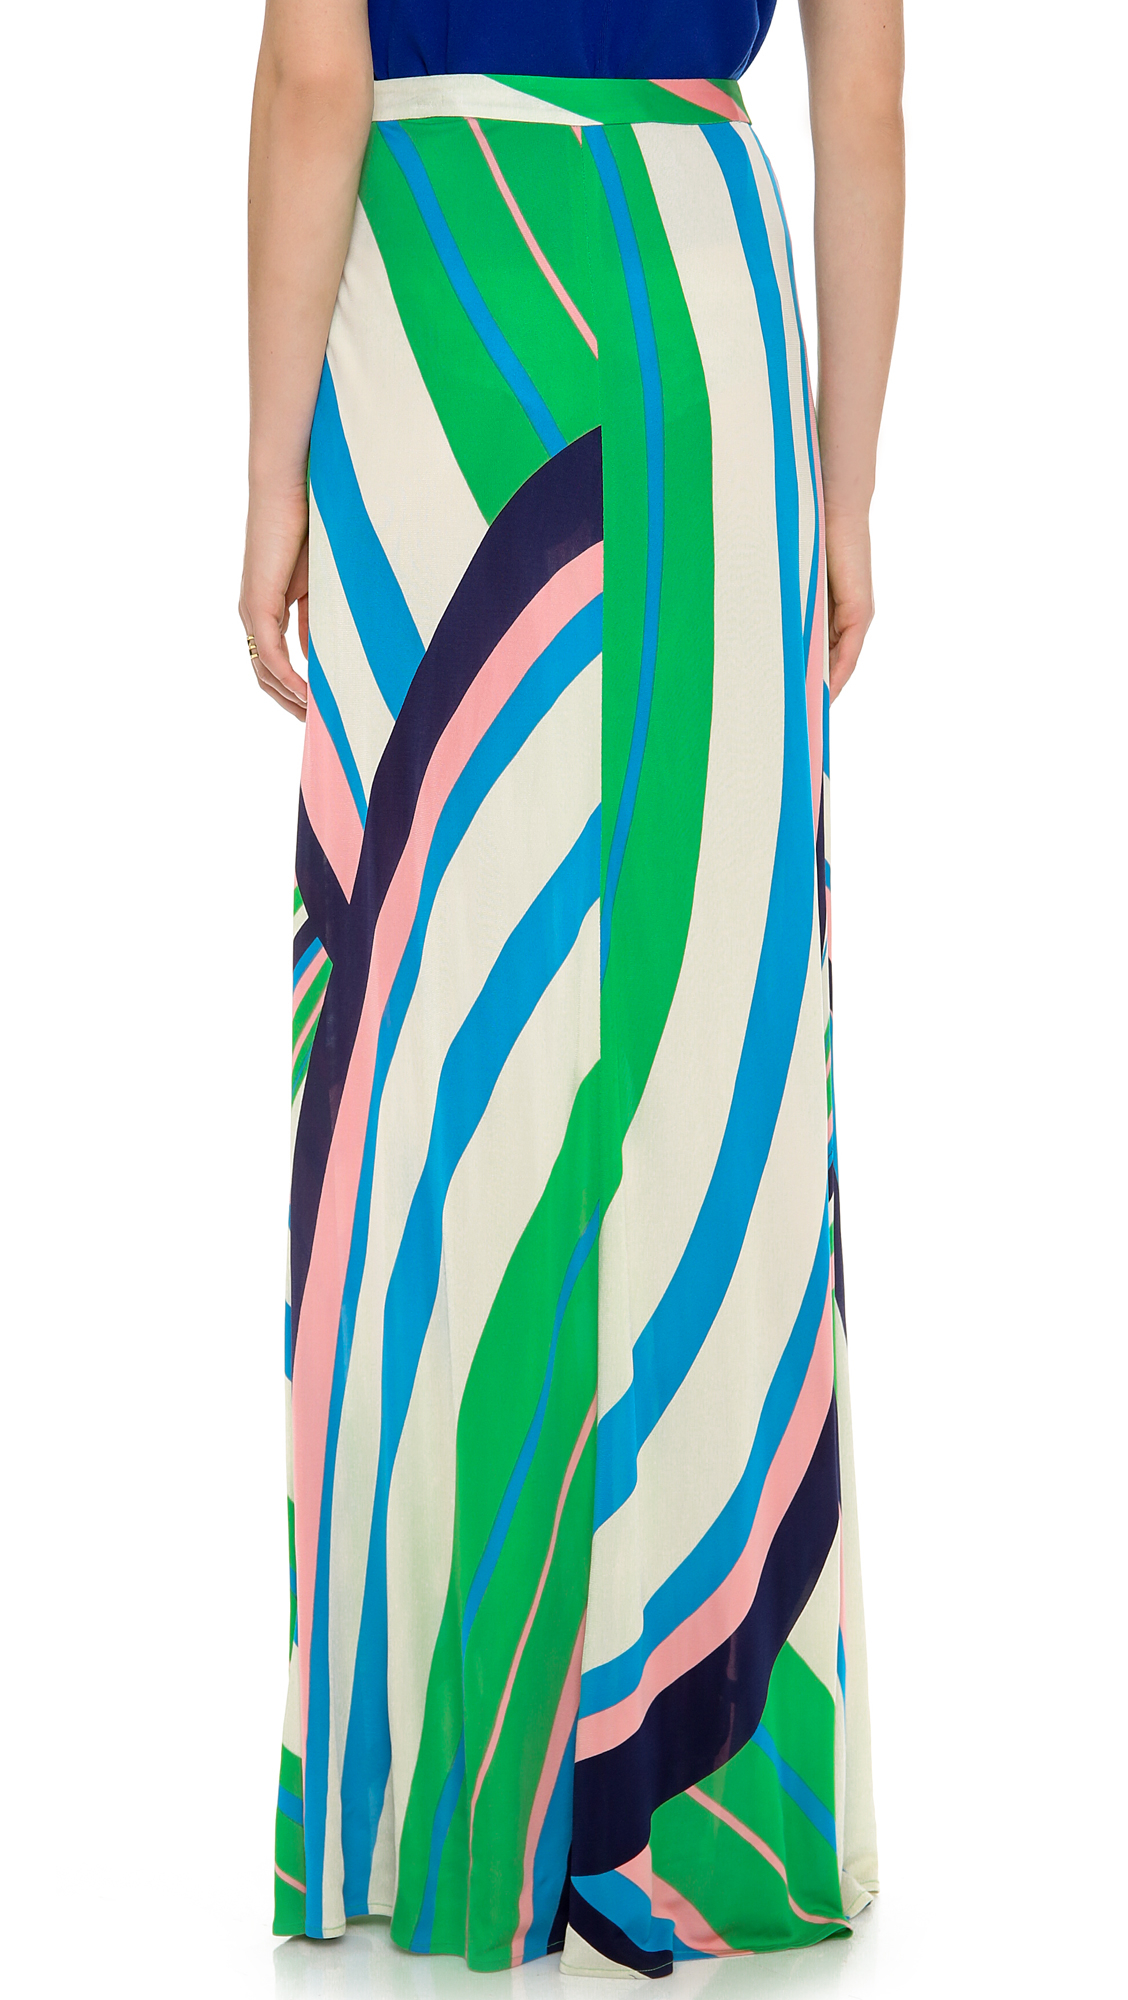 Lyst - Issa Printed Maxi Skirt in Green